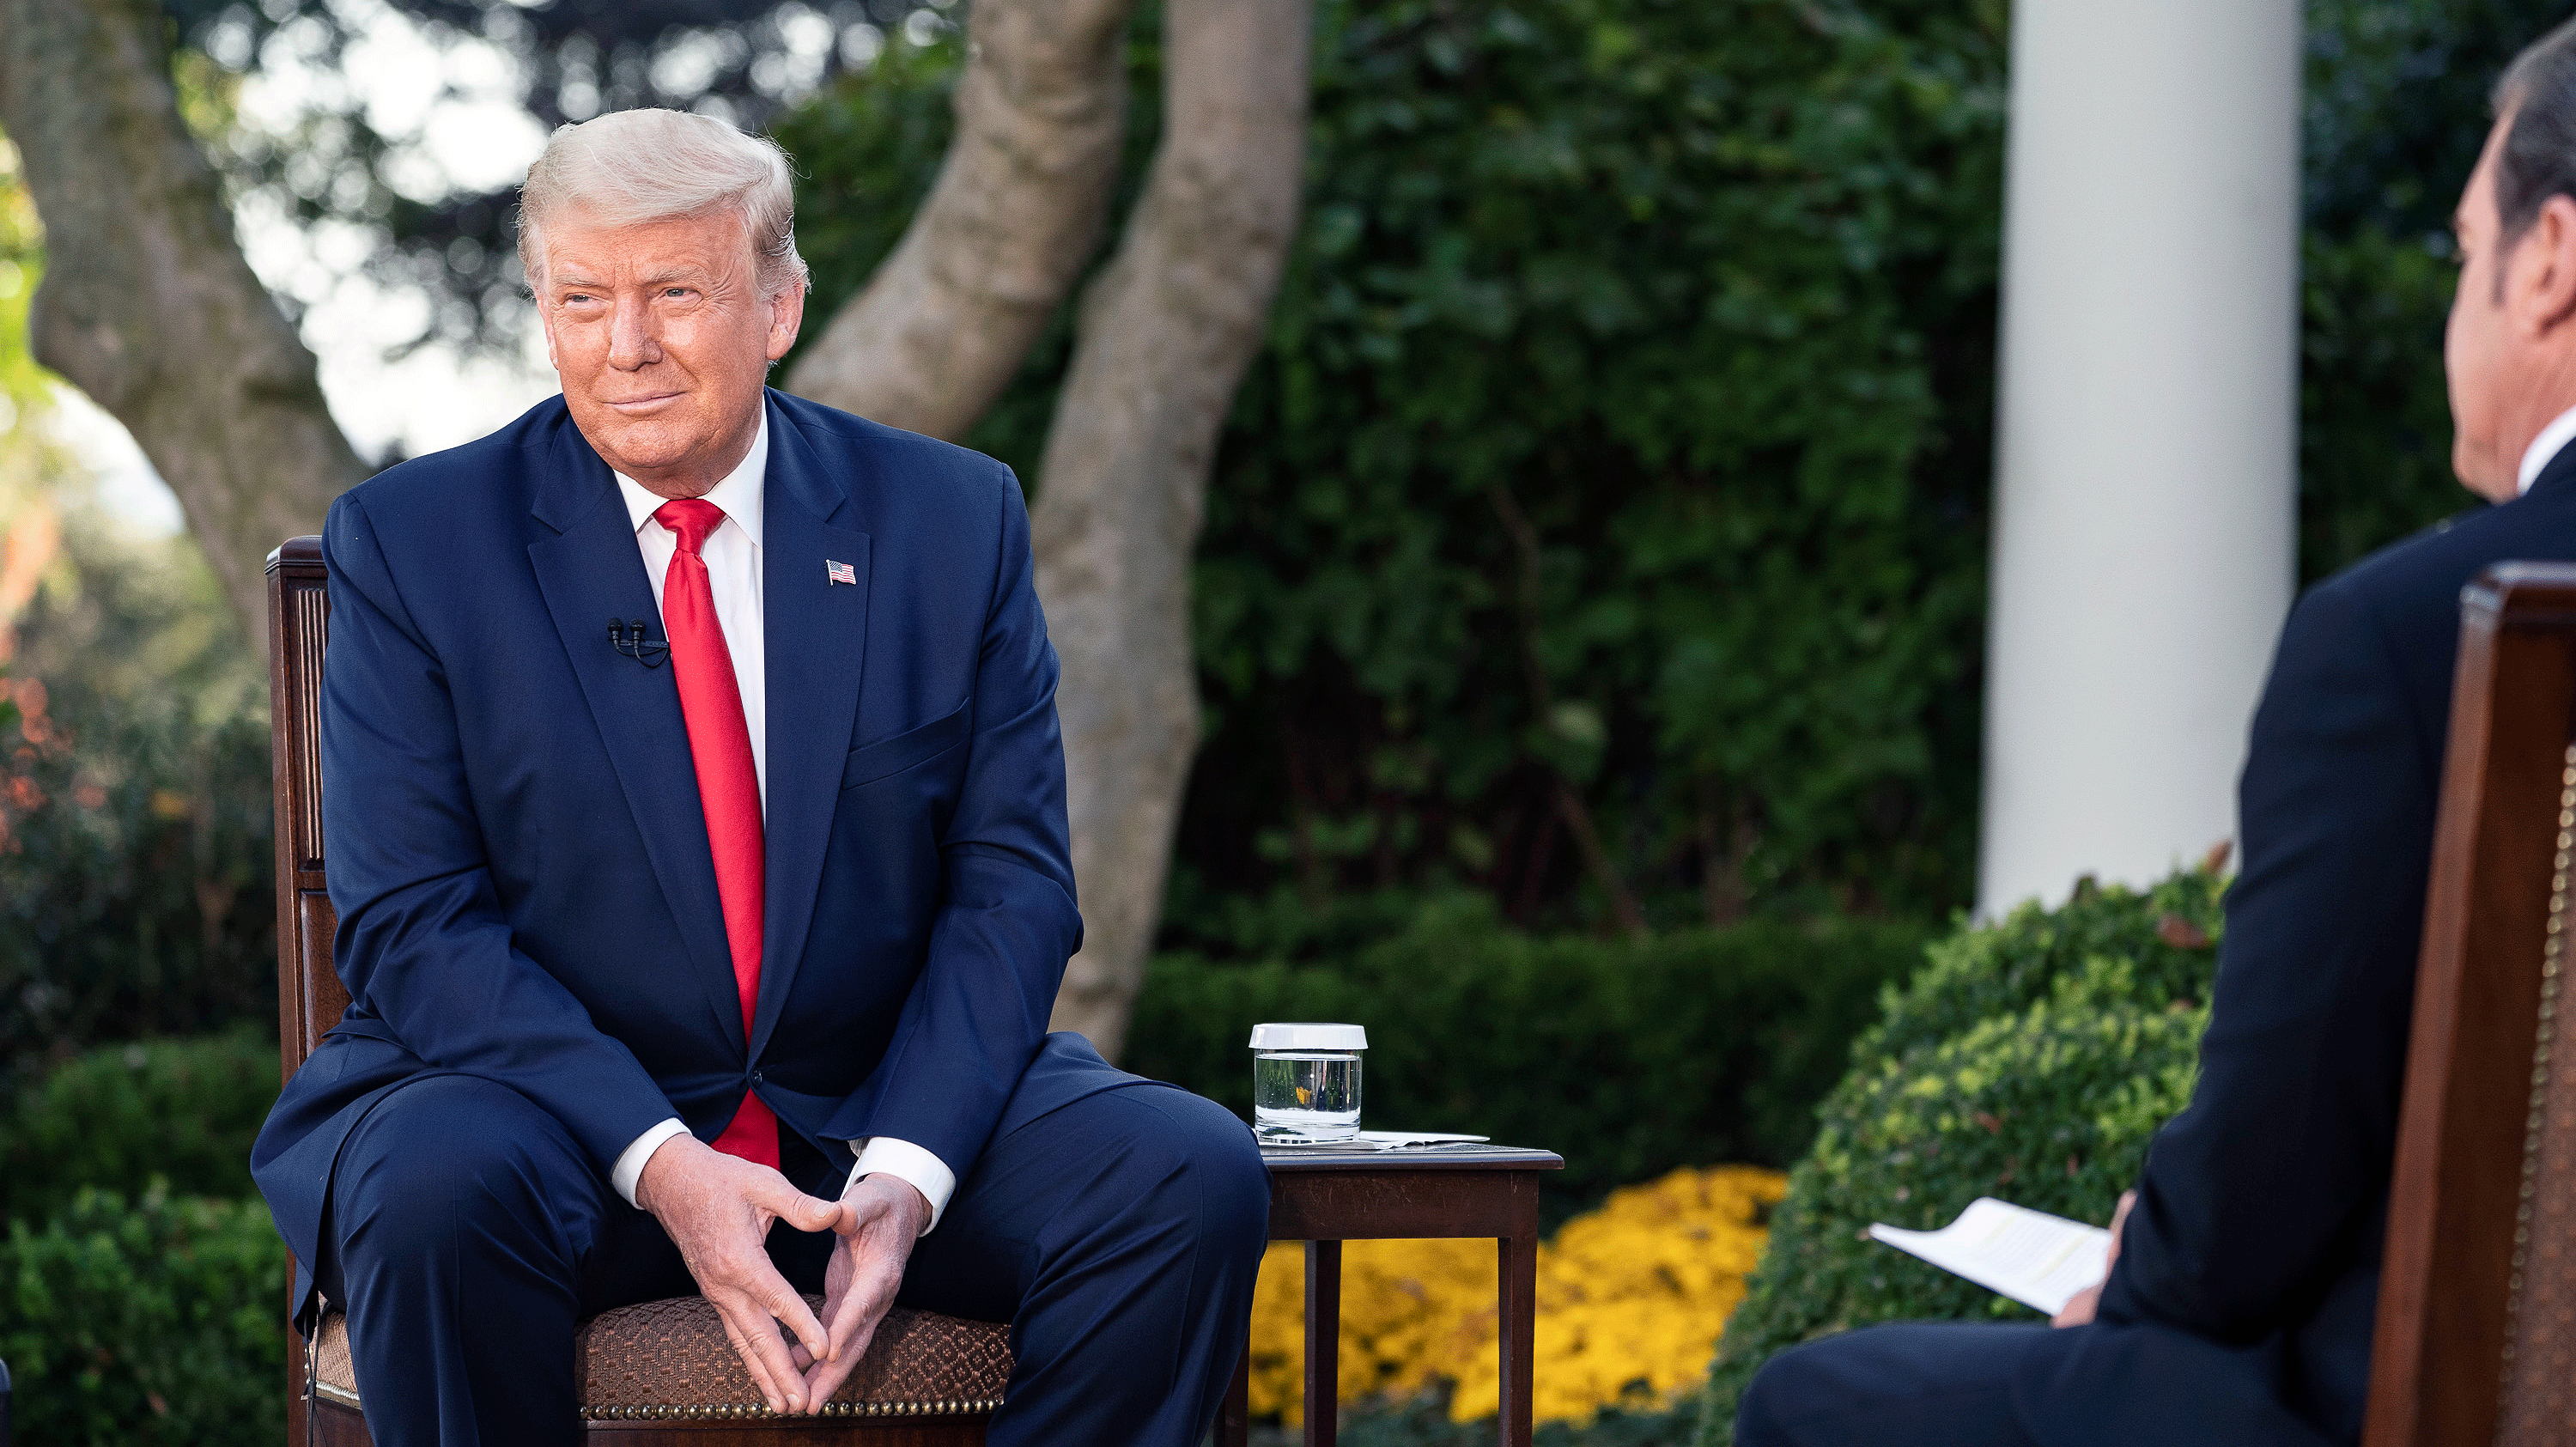 Donald Trump, wearing a blue suit, white shirt and red tie, sits pensively in the White House Rose Garden during an October 2020 town hall event sponsored by conservative Sinclair Broadcast Group 